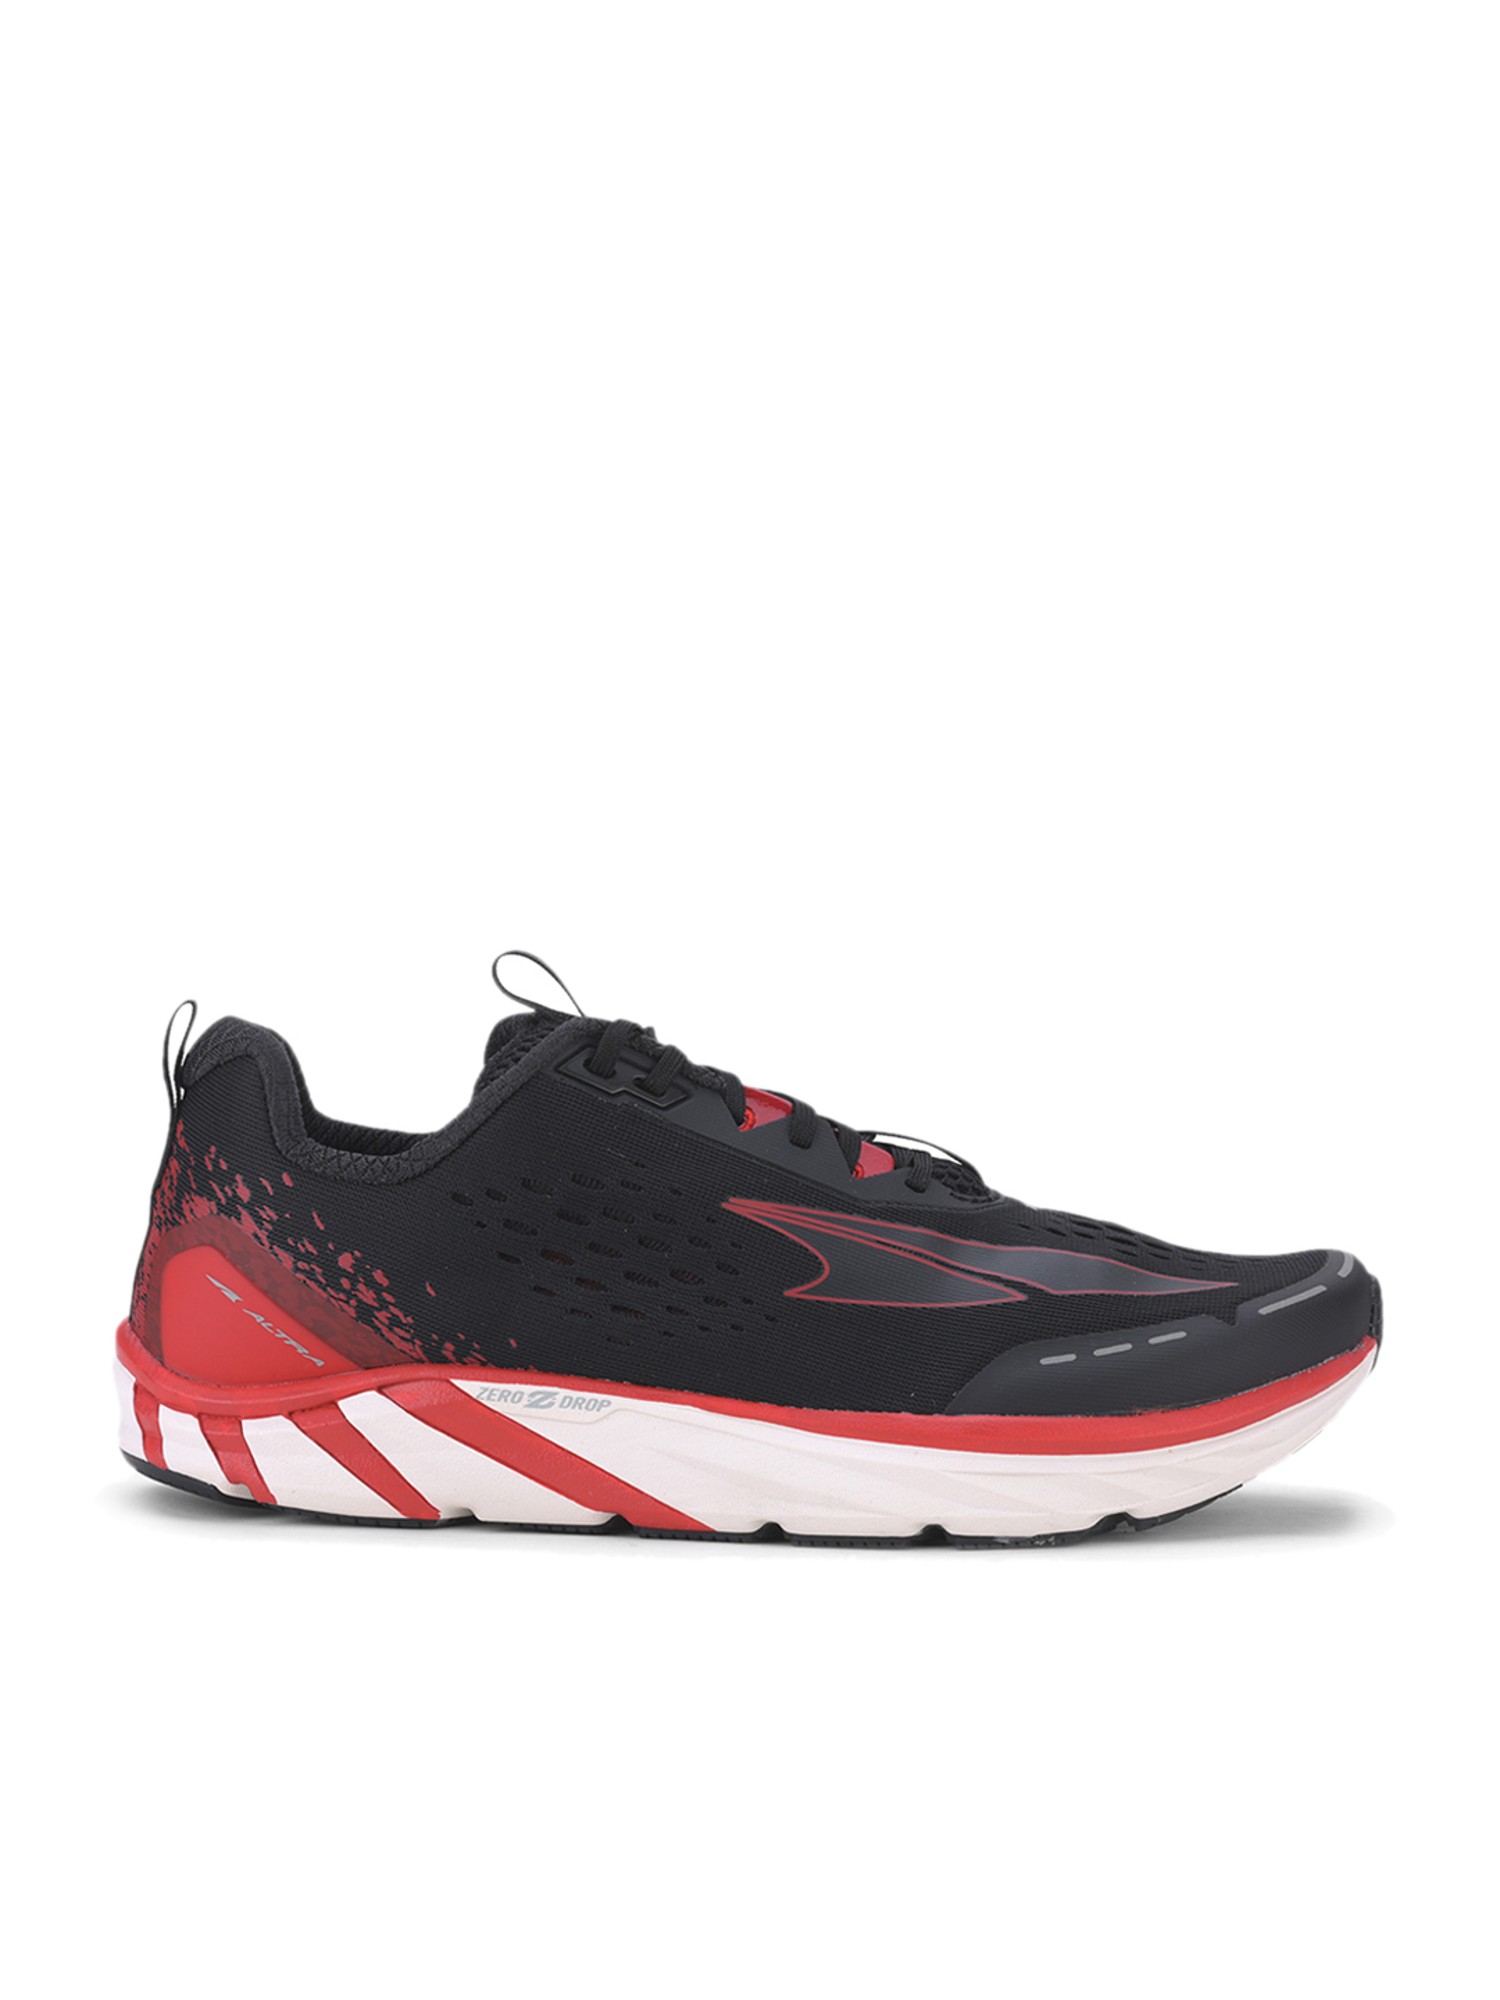 ALM1937F061 for sale online Altra Torin 4 Men's Running Shoes Size 9 or 10 Black / Red 